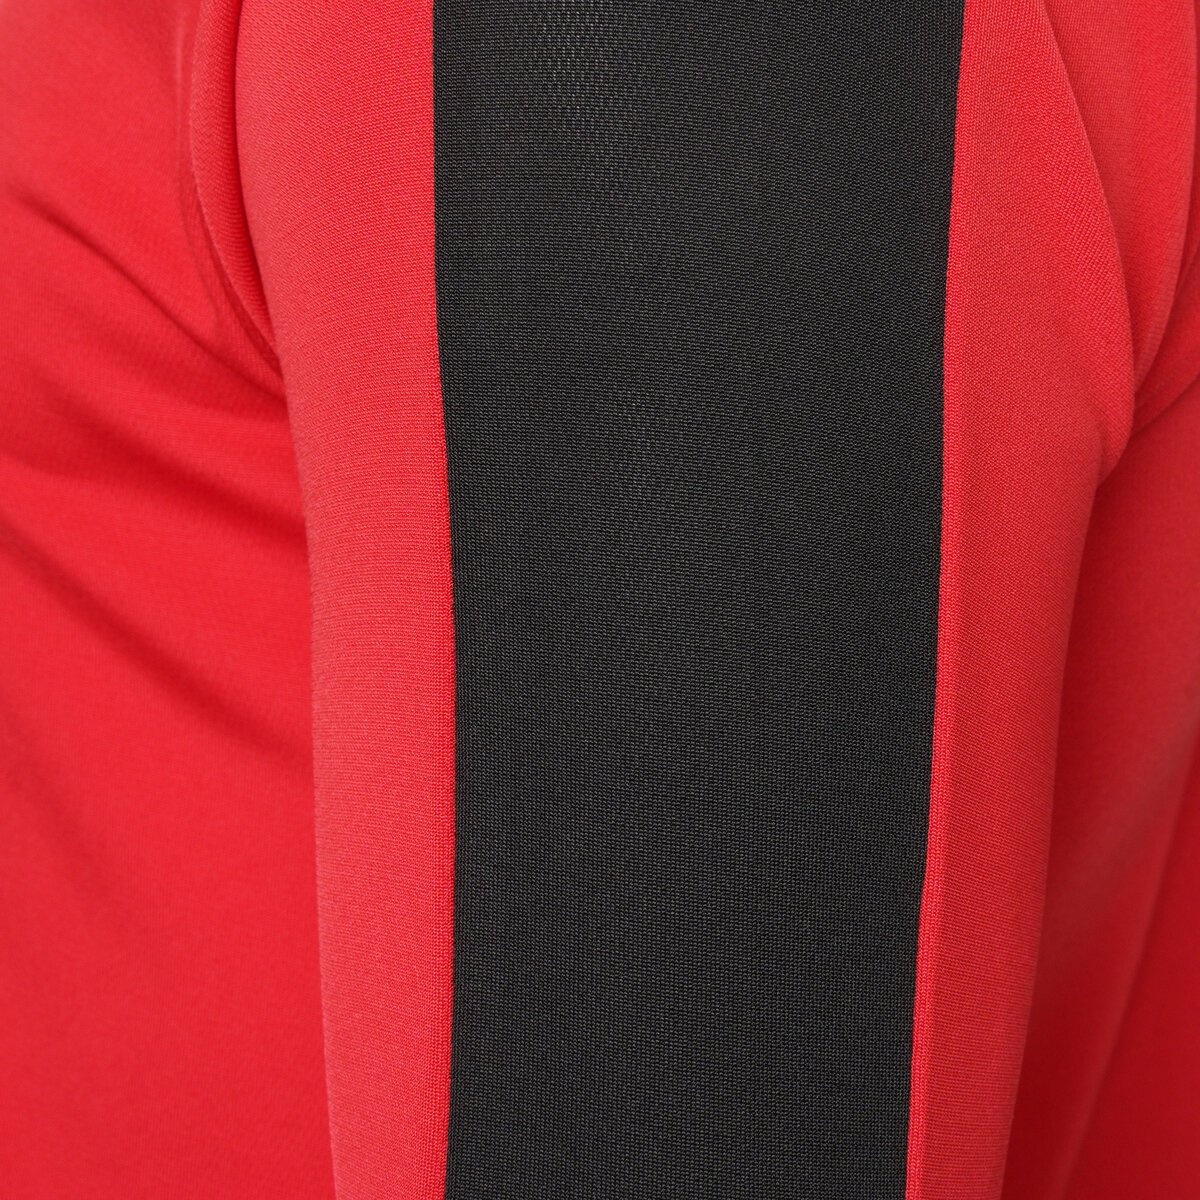 Home Jersey Shirt in Red/black - 4